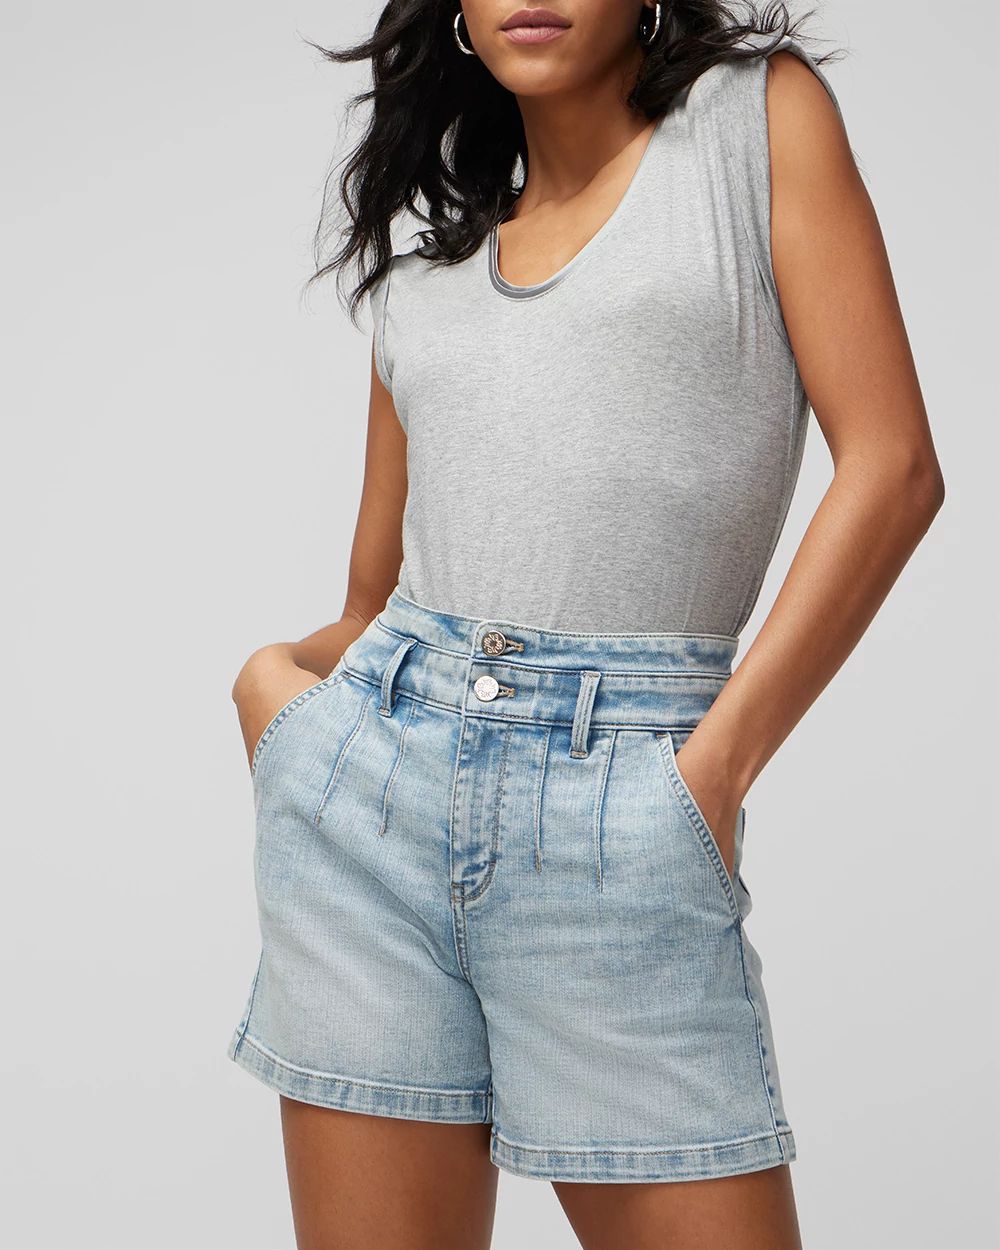 High-Rise Everyday Soft Denim™ Pleated 5-Inch Shorts click to view larger image.